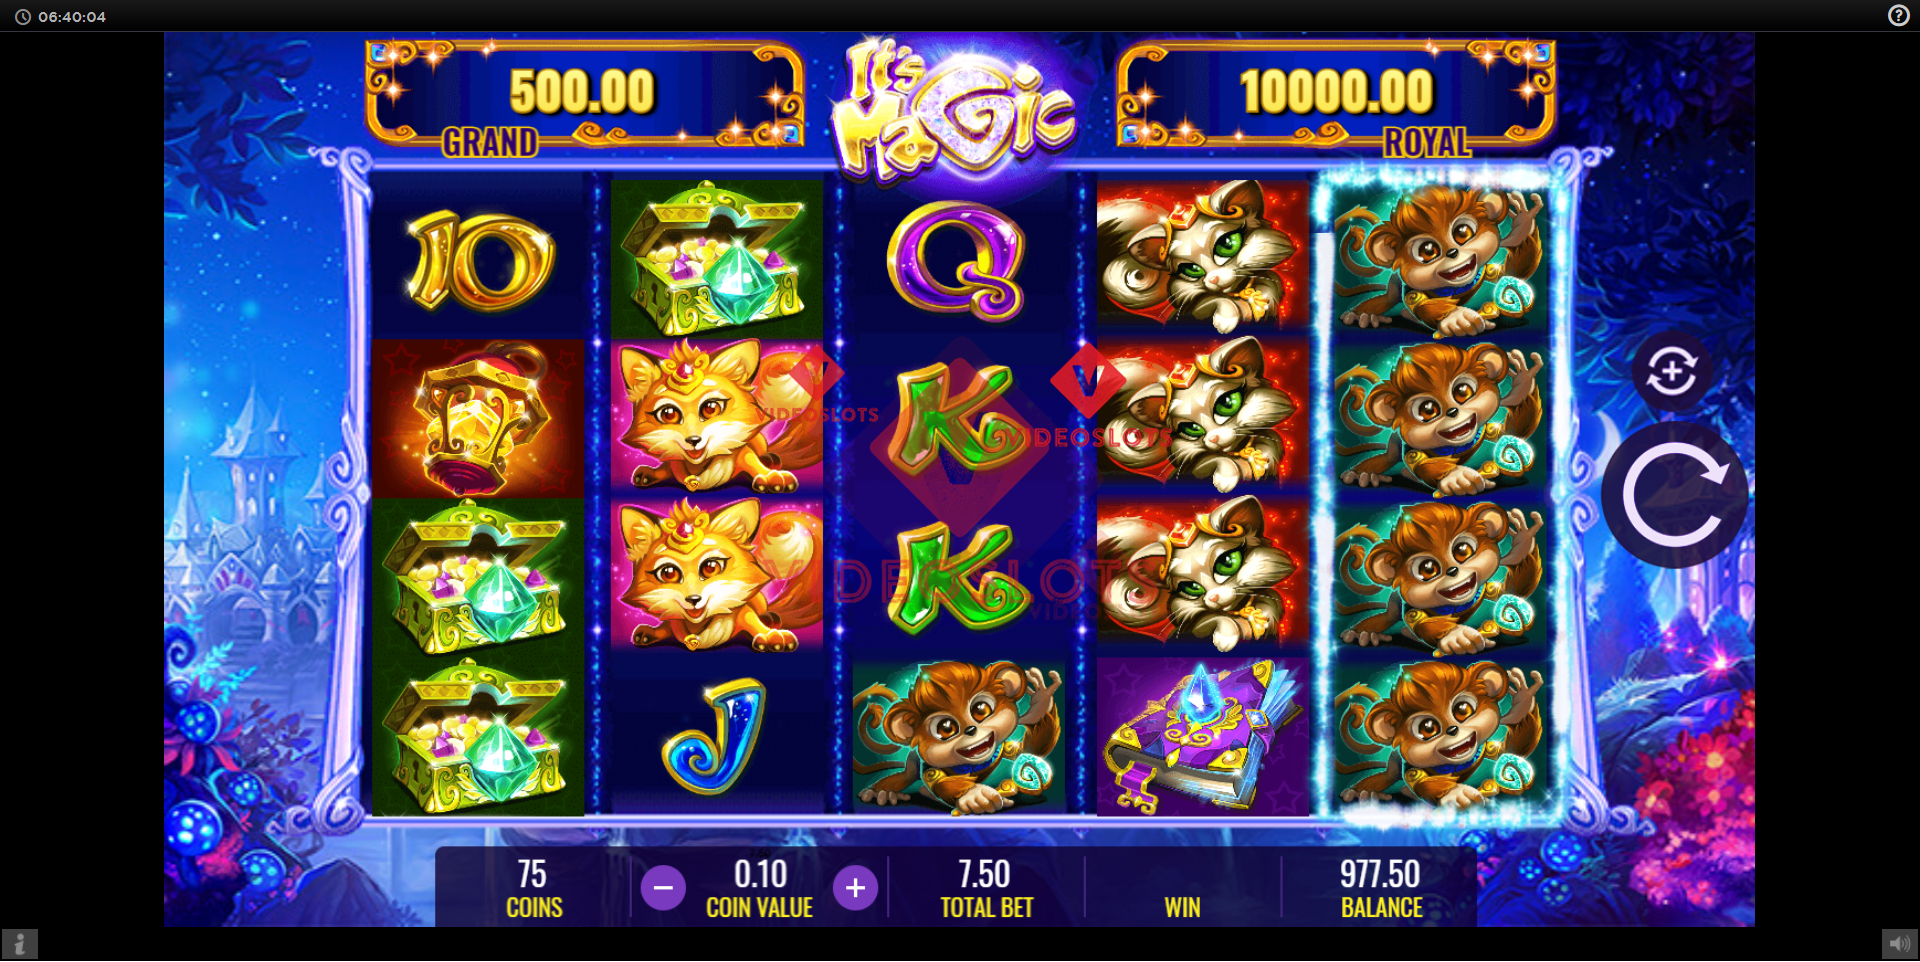 Base Game for It's Magic slot from IGT